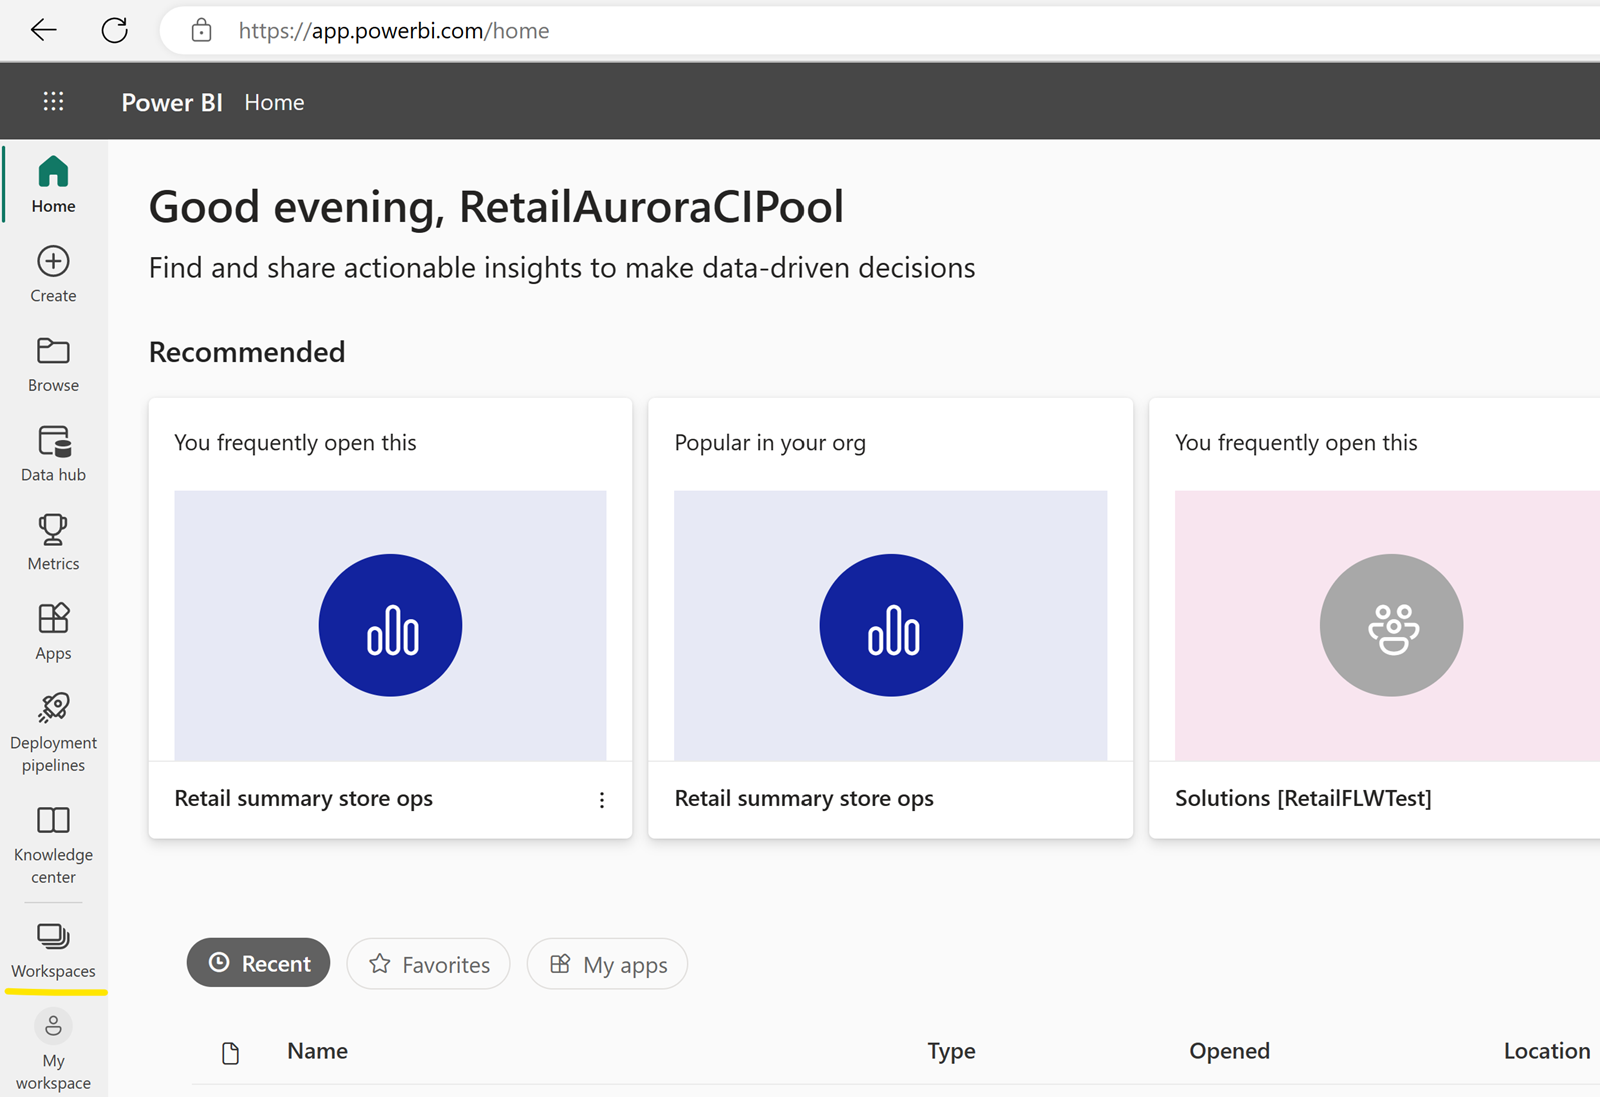 The image shows how to deploy retail insights dashboard.